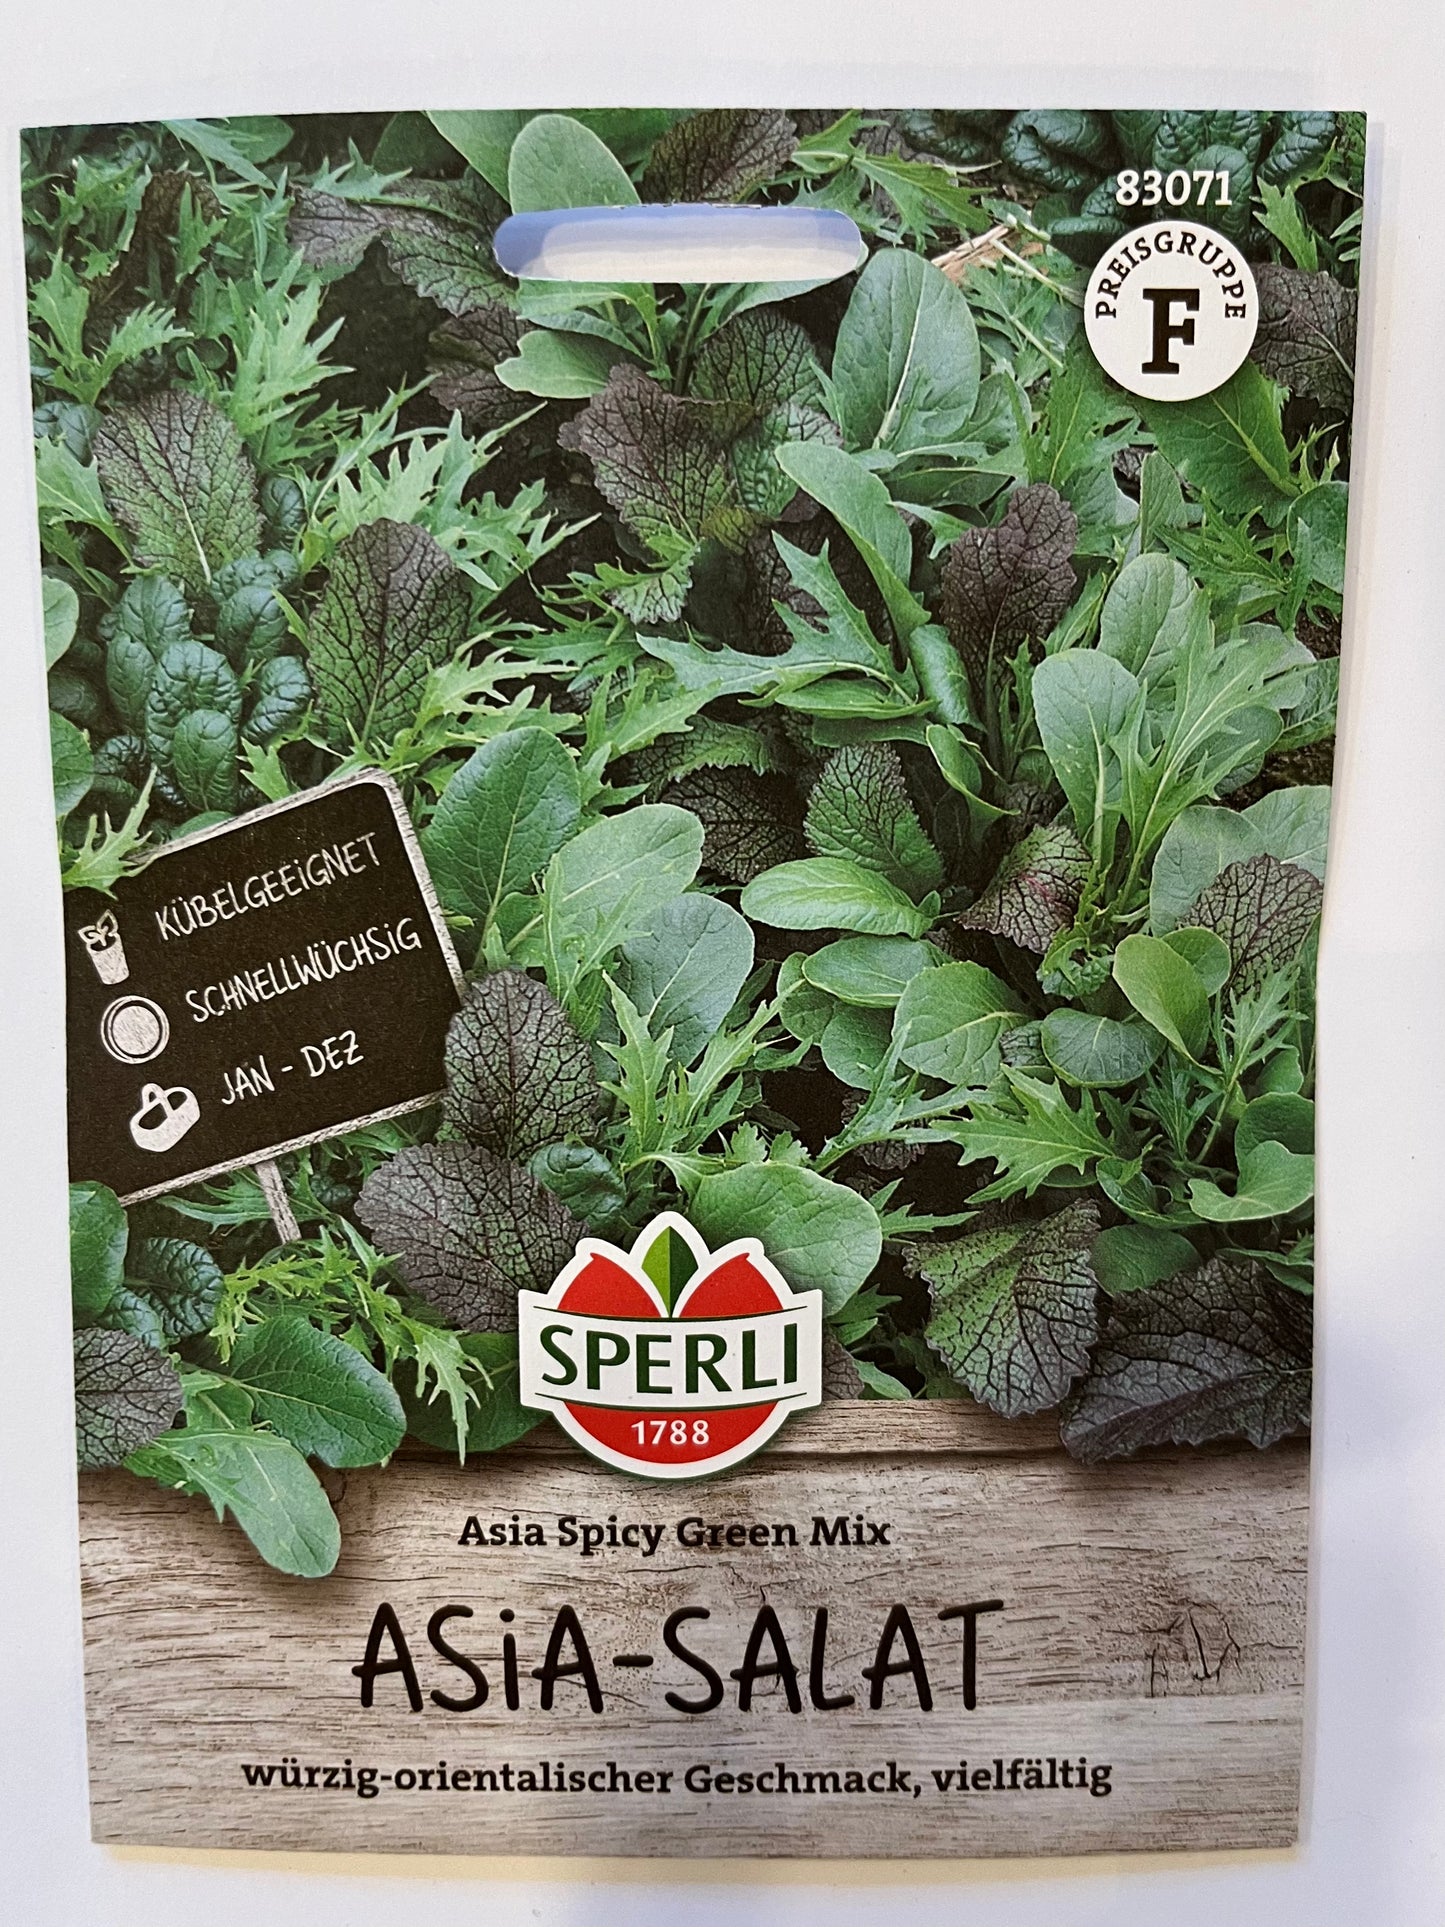 Asia-Salat Asia Spicy Green Mix